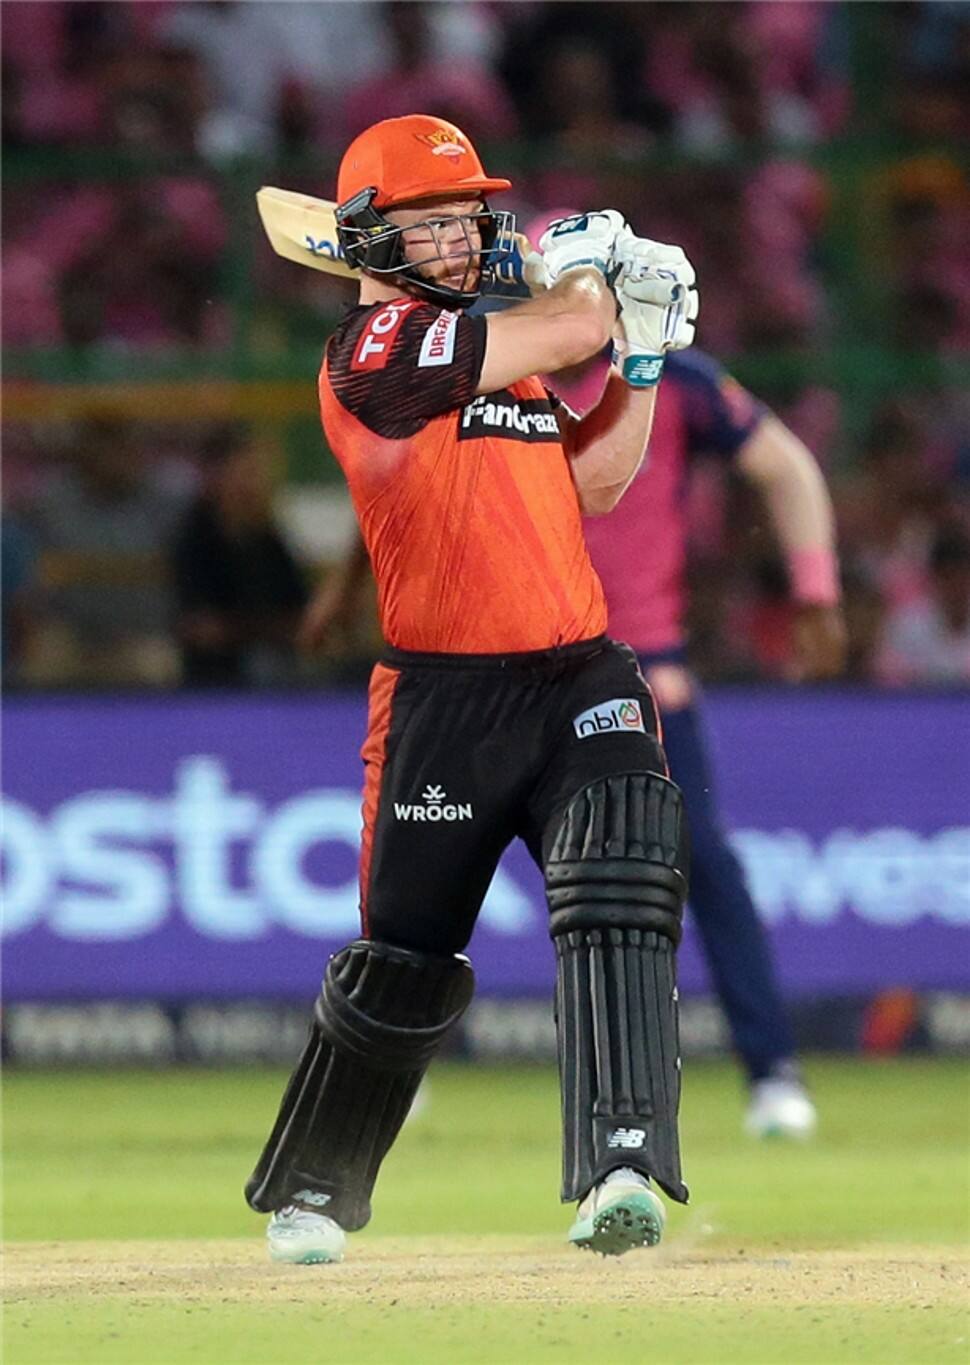 Sunrisers Hyderabad batter Glenn Phillips has played in only 2 matches in IPL 2023 but has the best strike-rate of 253.84, including a match-winning 25 off 7 balls against Rajasthan Royals in the last match. (Photo: IANS)